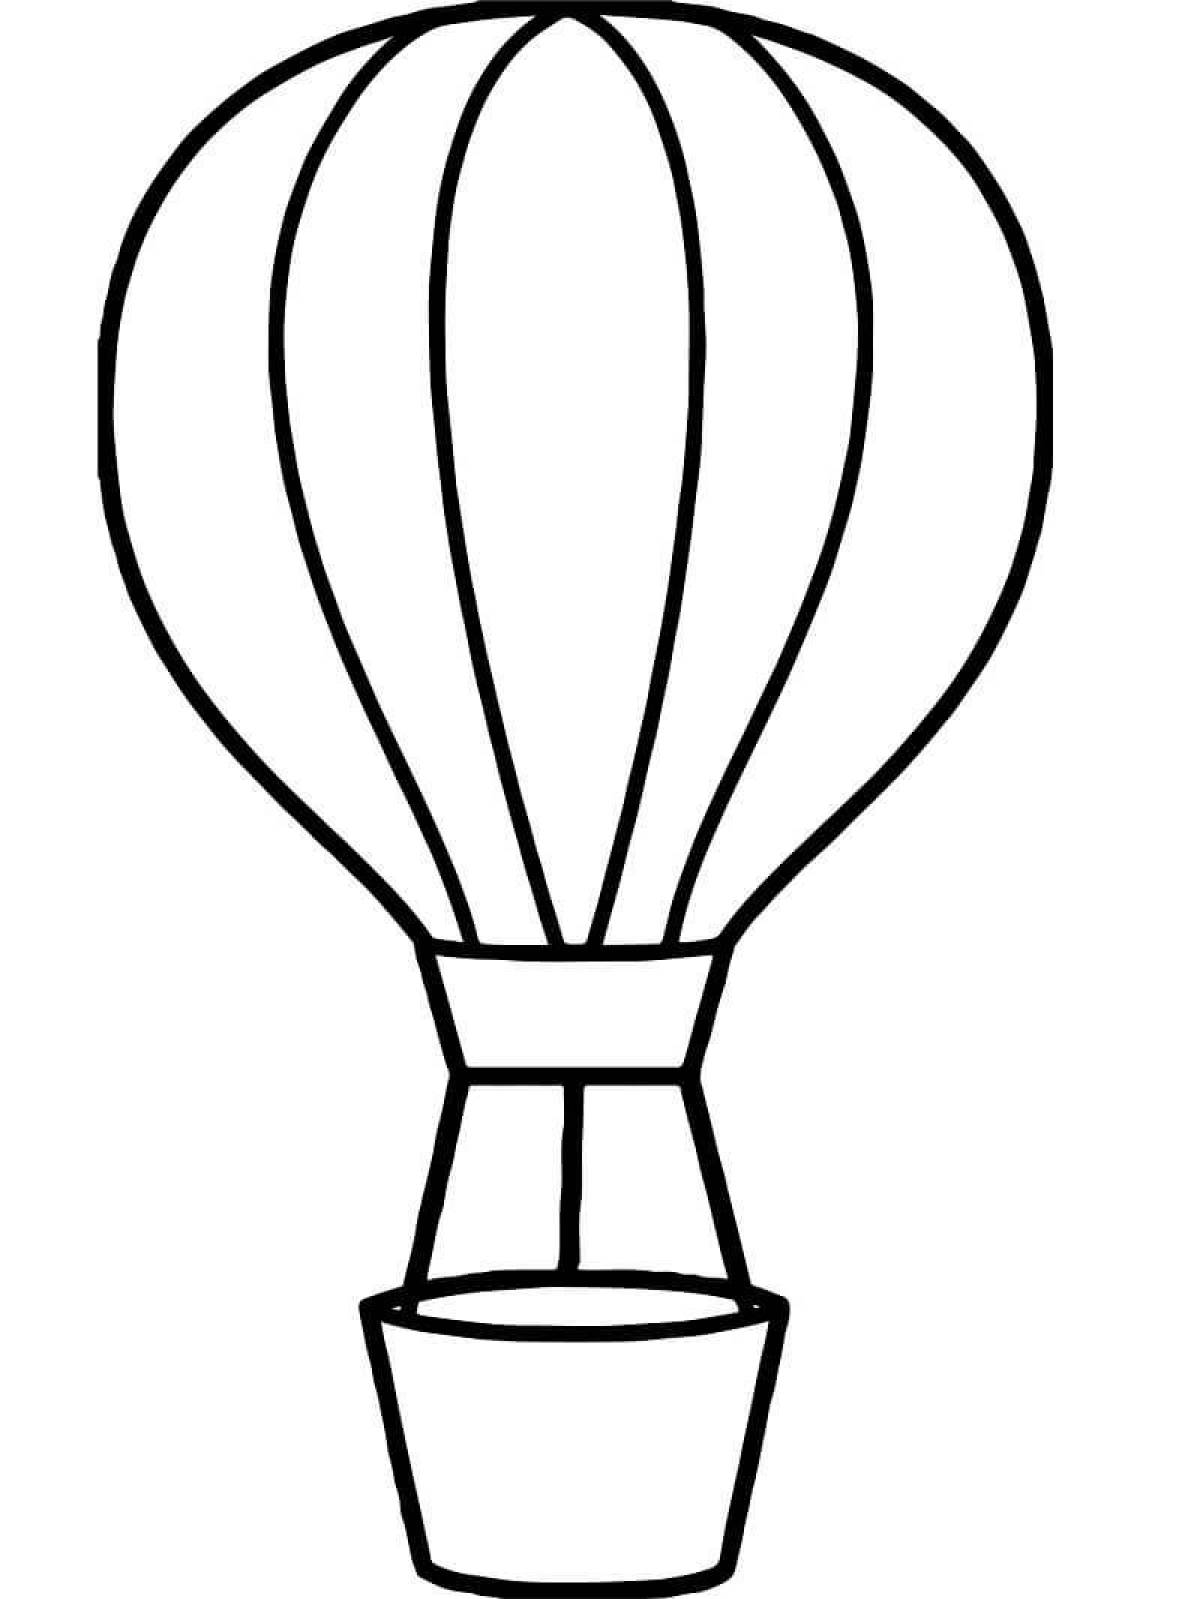 Living balloon coloring page